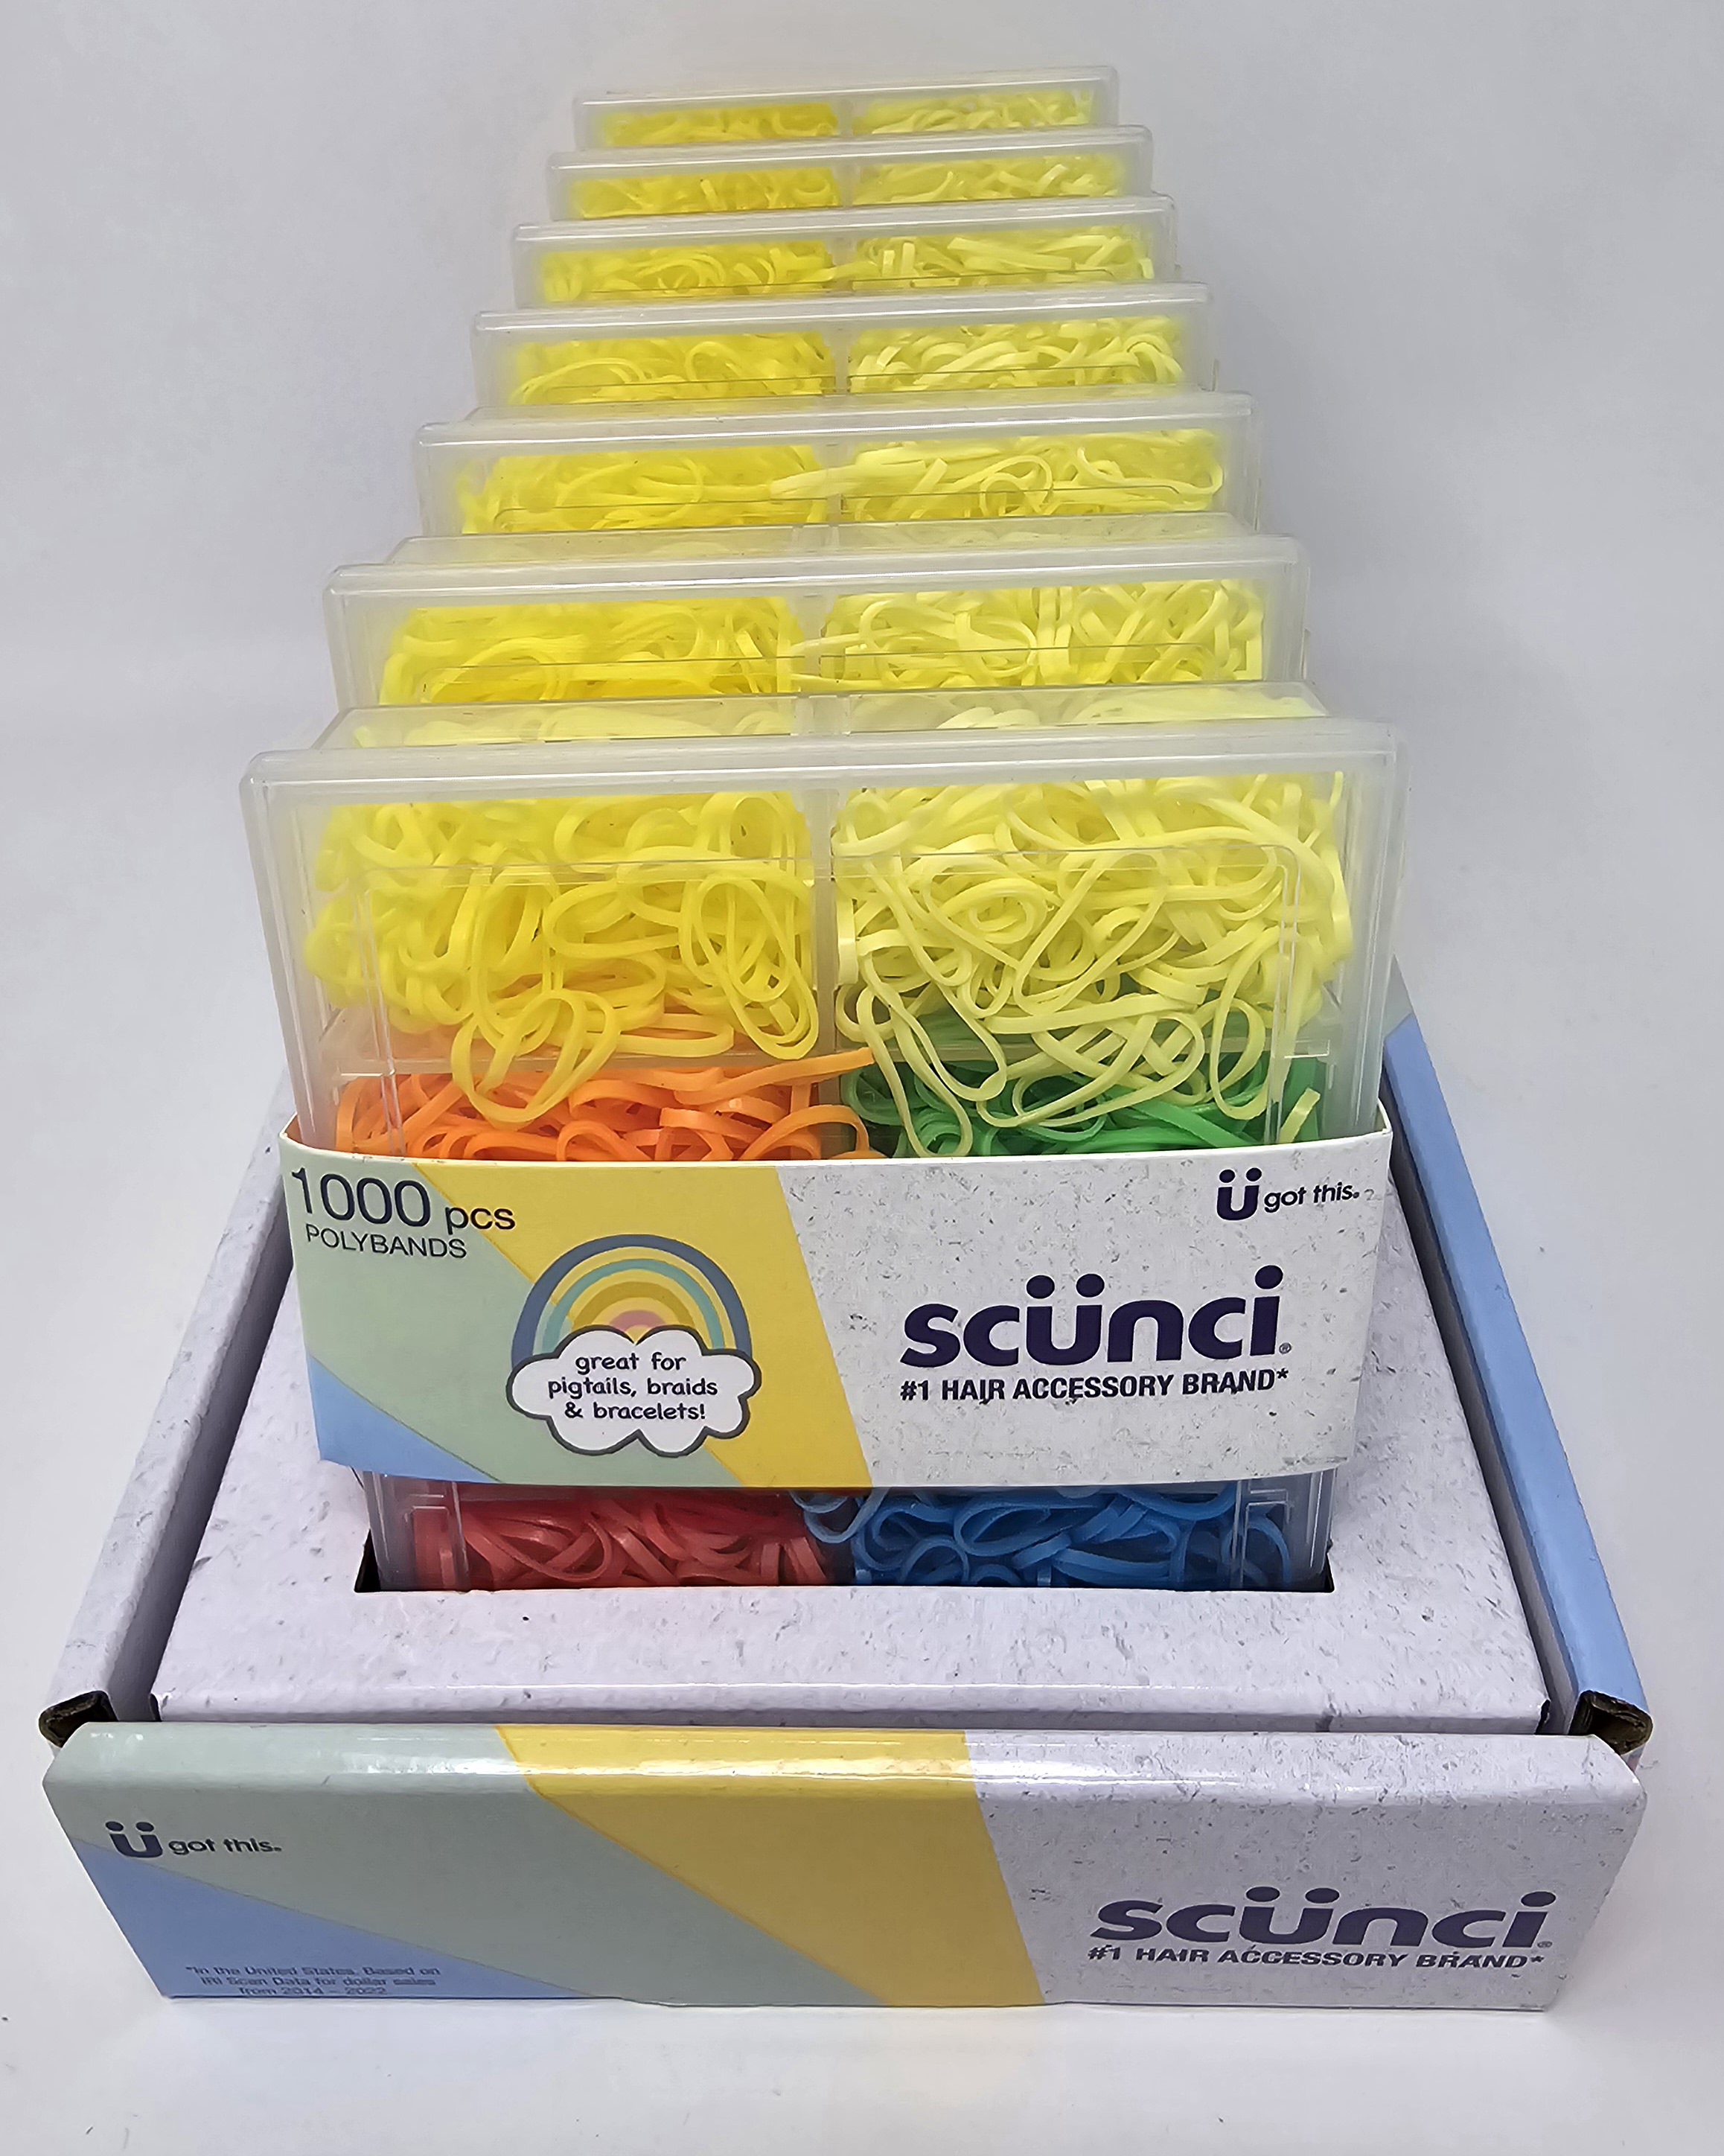 SCUNCI NO DAMAGE POLYBANDS IN REUSABLE CASE, 1000 POLYBANDS PER CASE. 7 UNITS PER PDQ DISPLAY - Click Image to Close